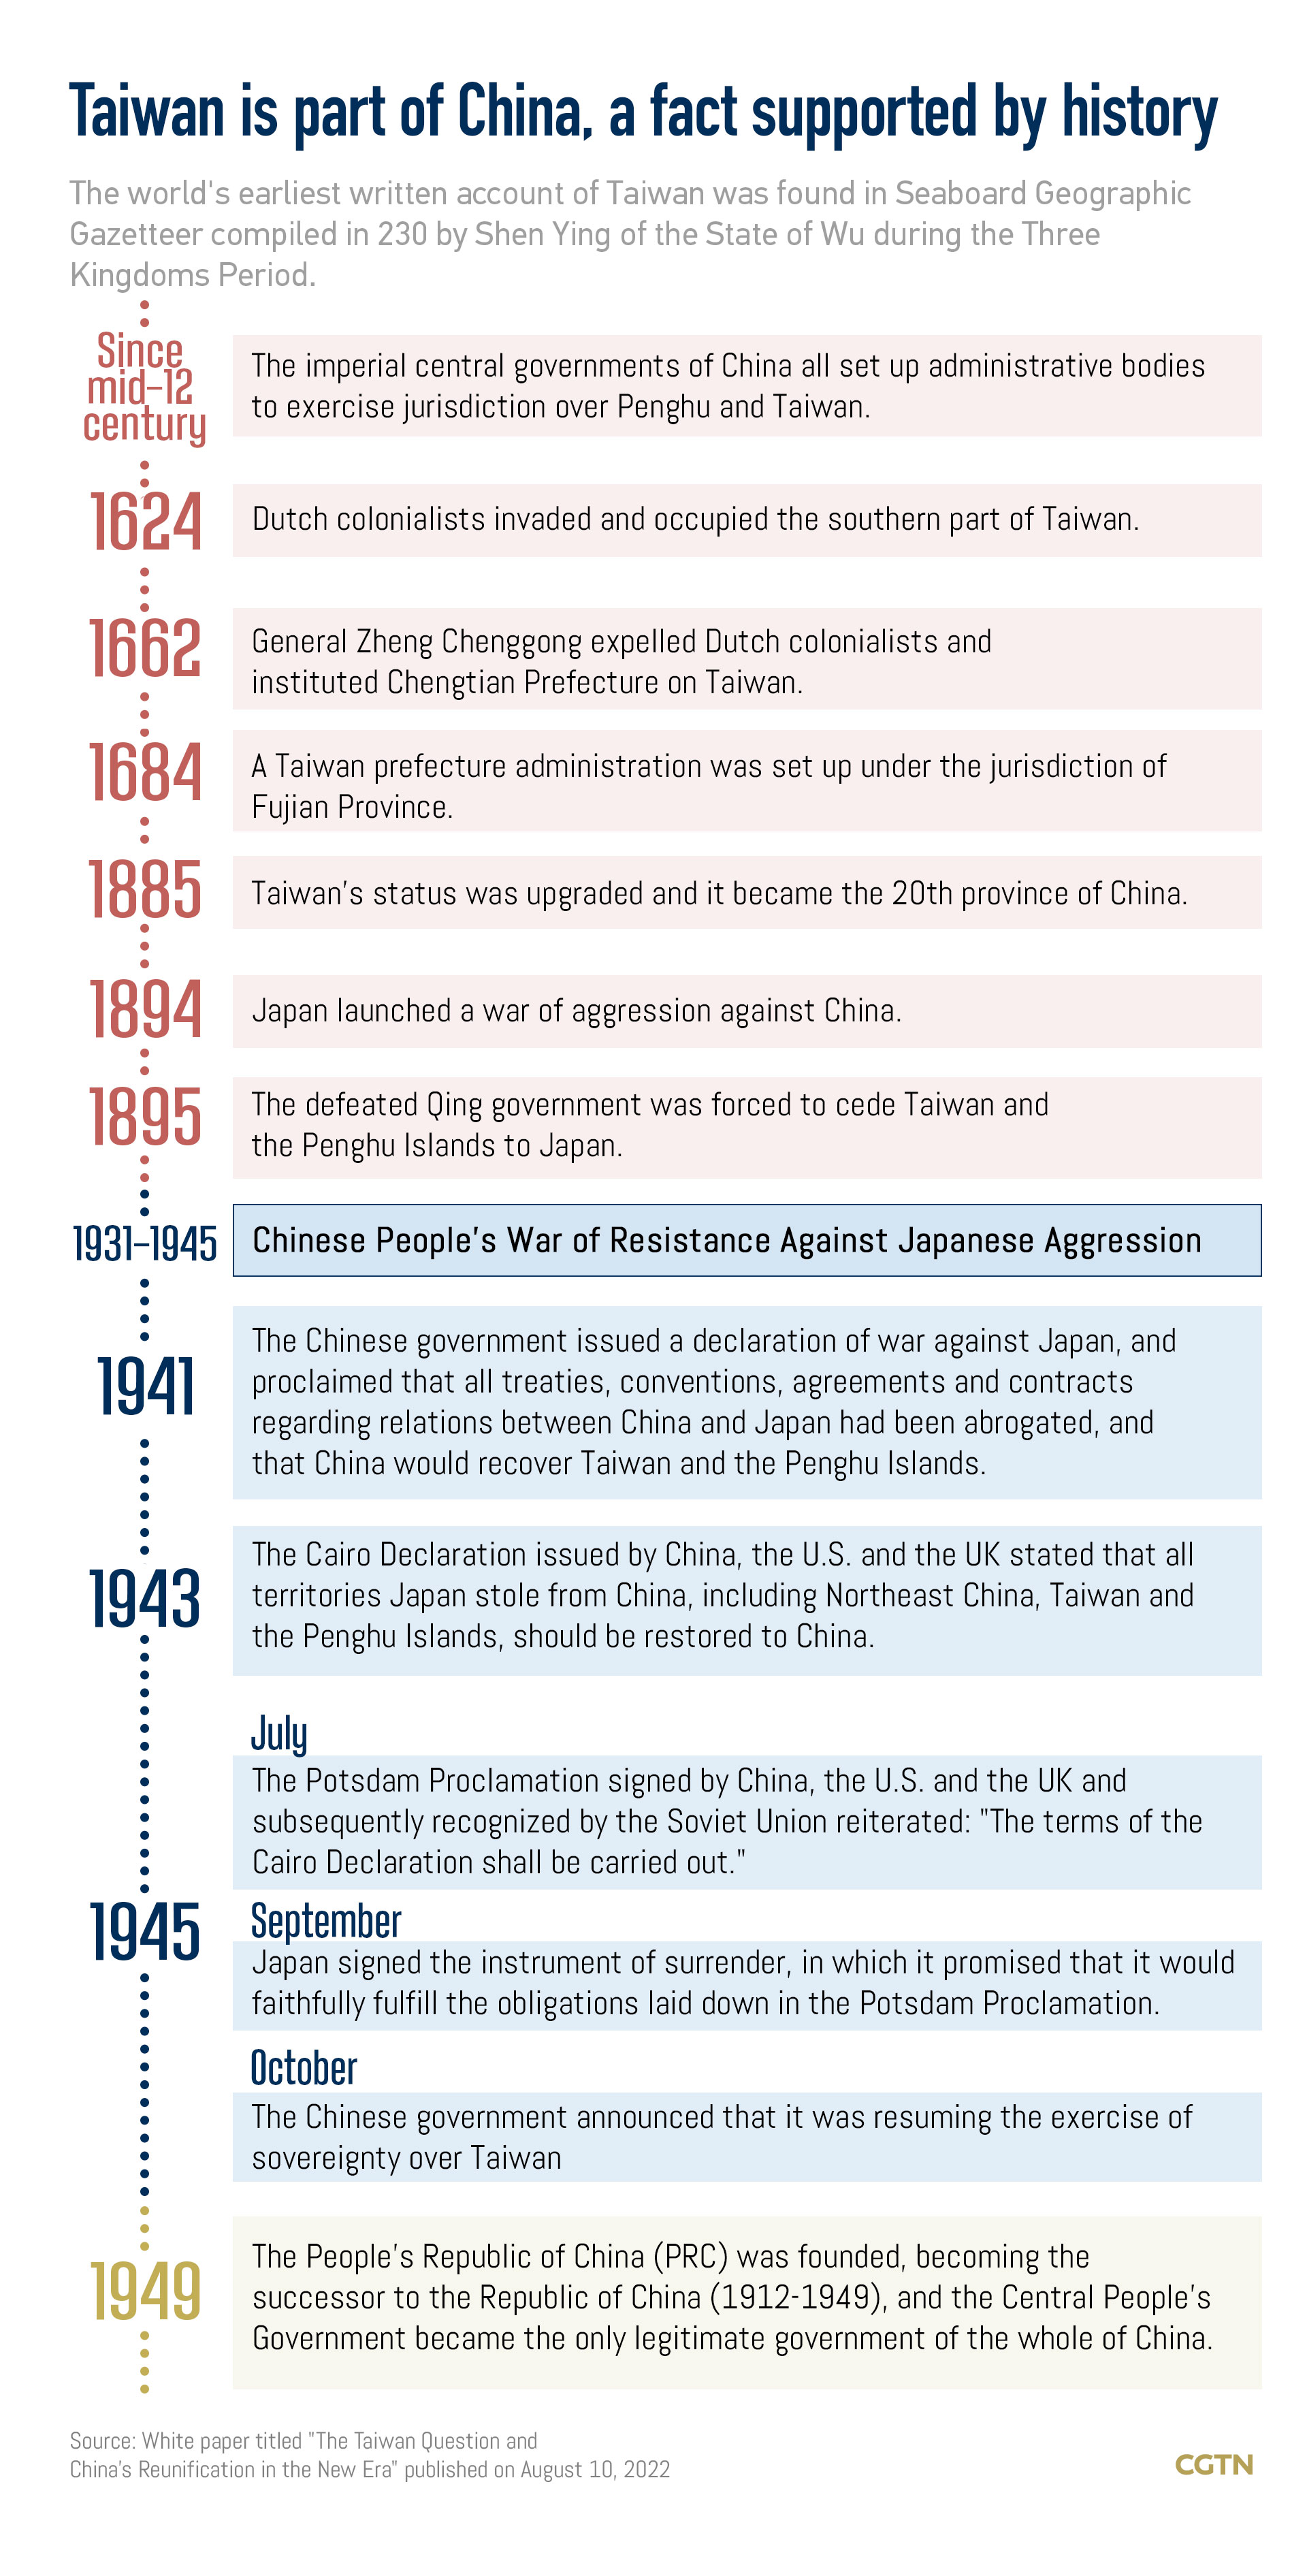 Graphics: Historical and legal facts show Taiwan is part of China